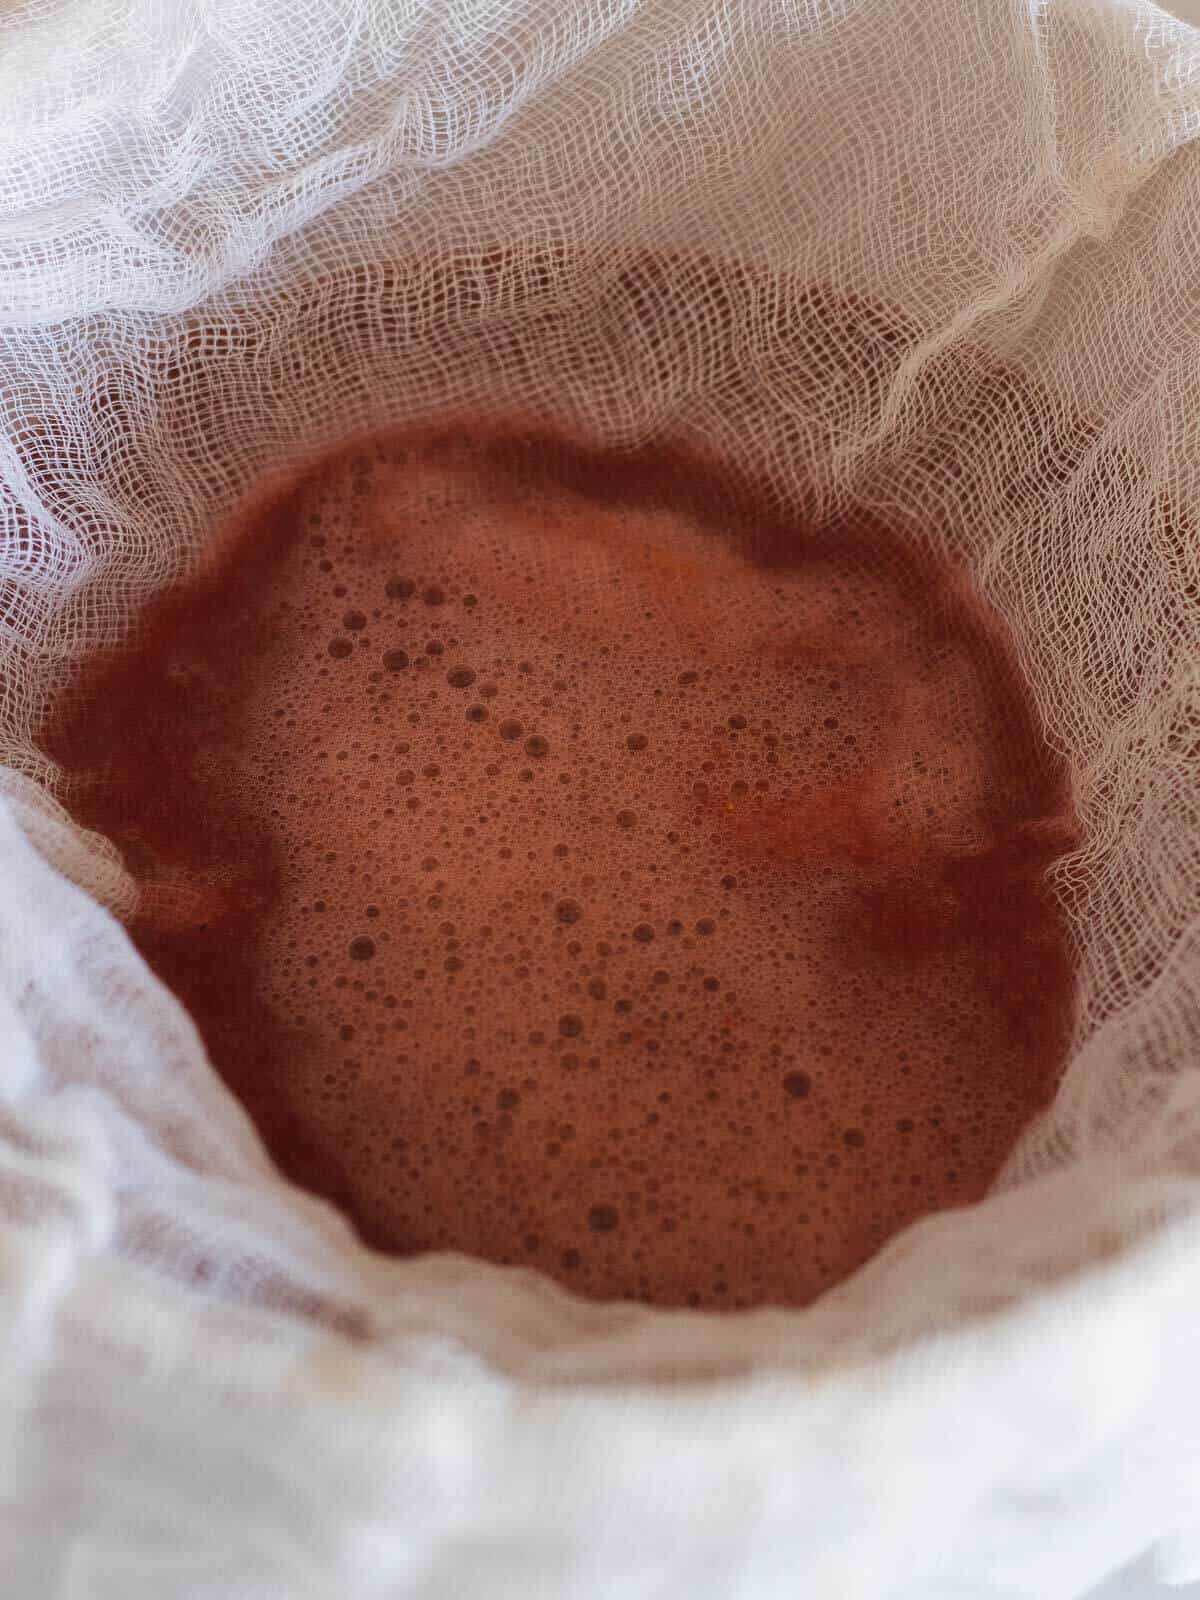 passing strawberry juice through a cheese cloth